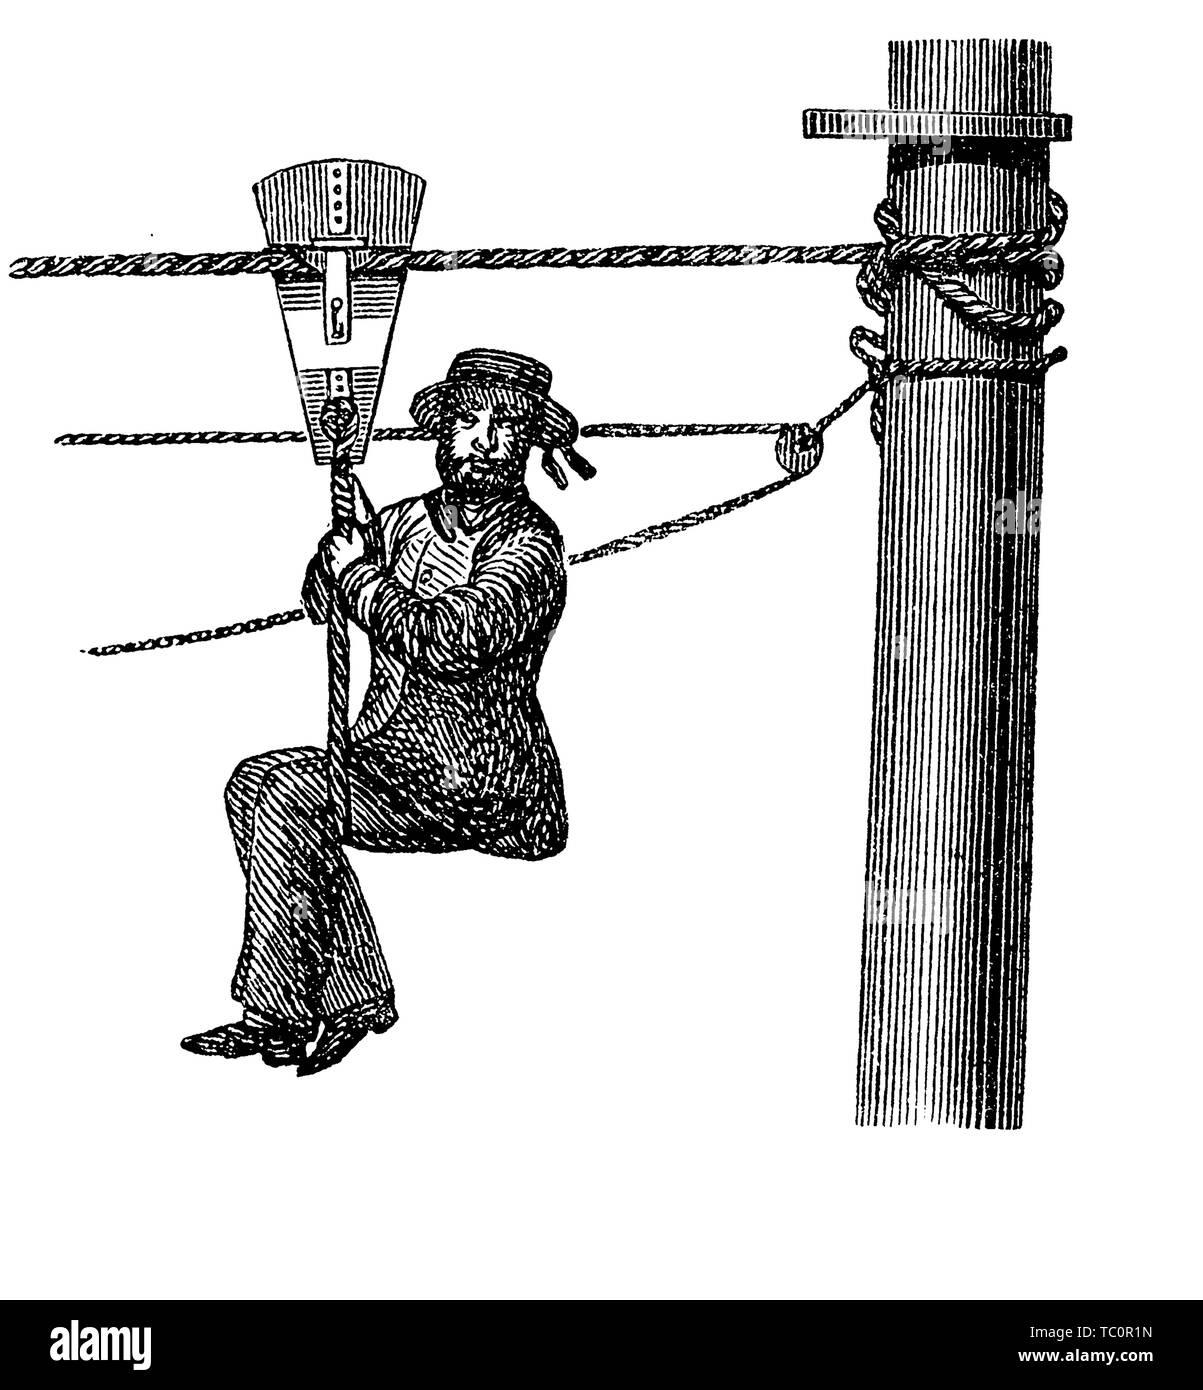 Vintage illustration describing the technique to transport with safety people from a wrecked ship Stock Photo